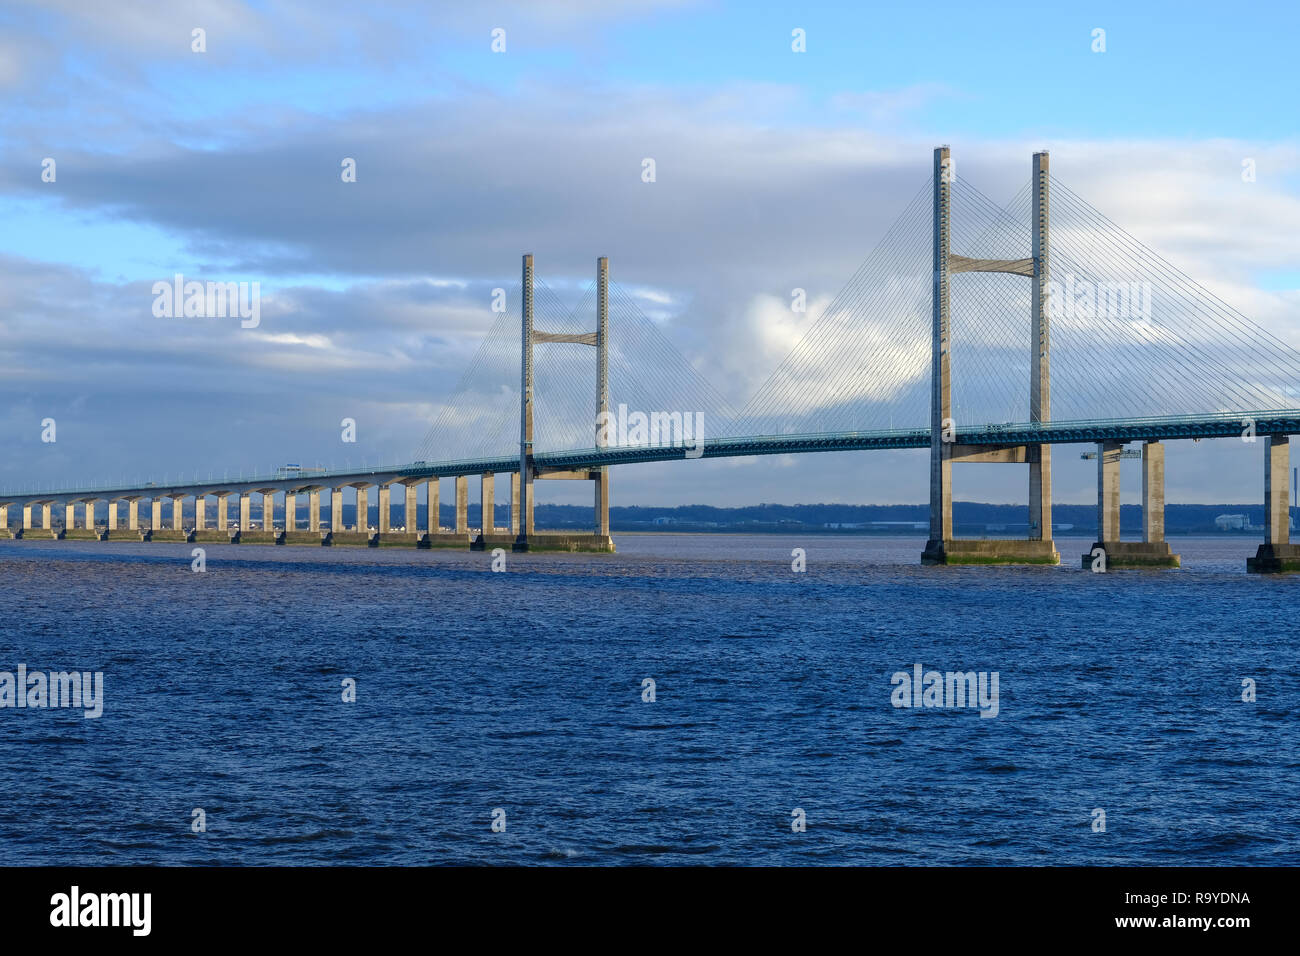 Second Severn Crossing over the mouth of the River Severn, England Stock Photo